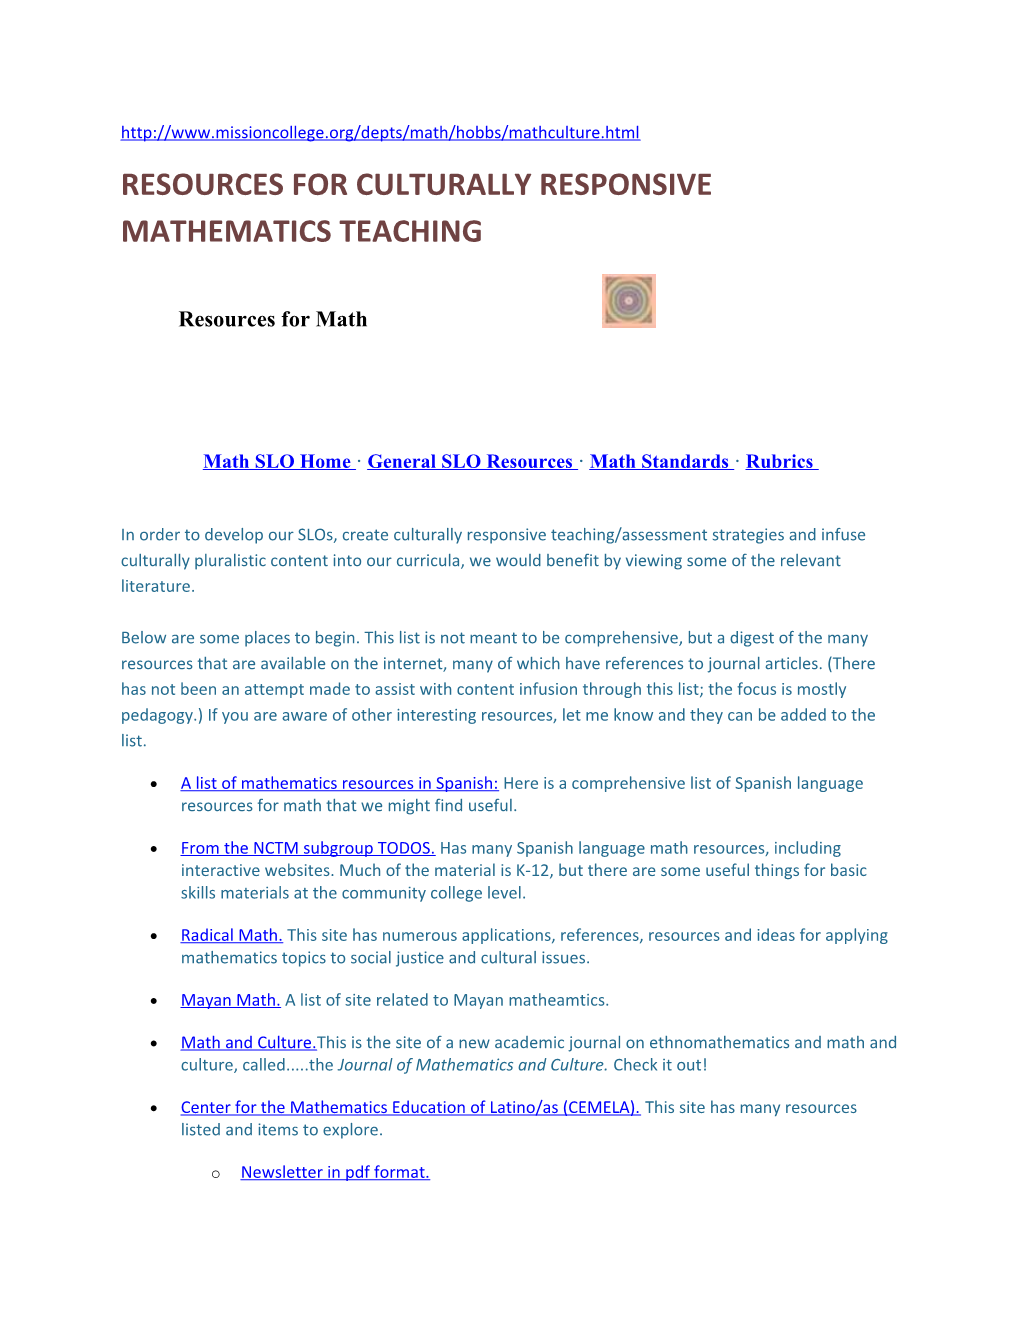 Resources for Culturally Responsive Mathematics Teaching